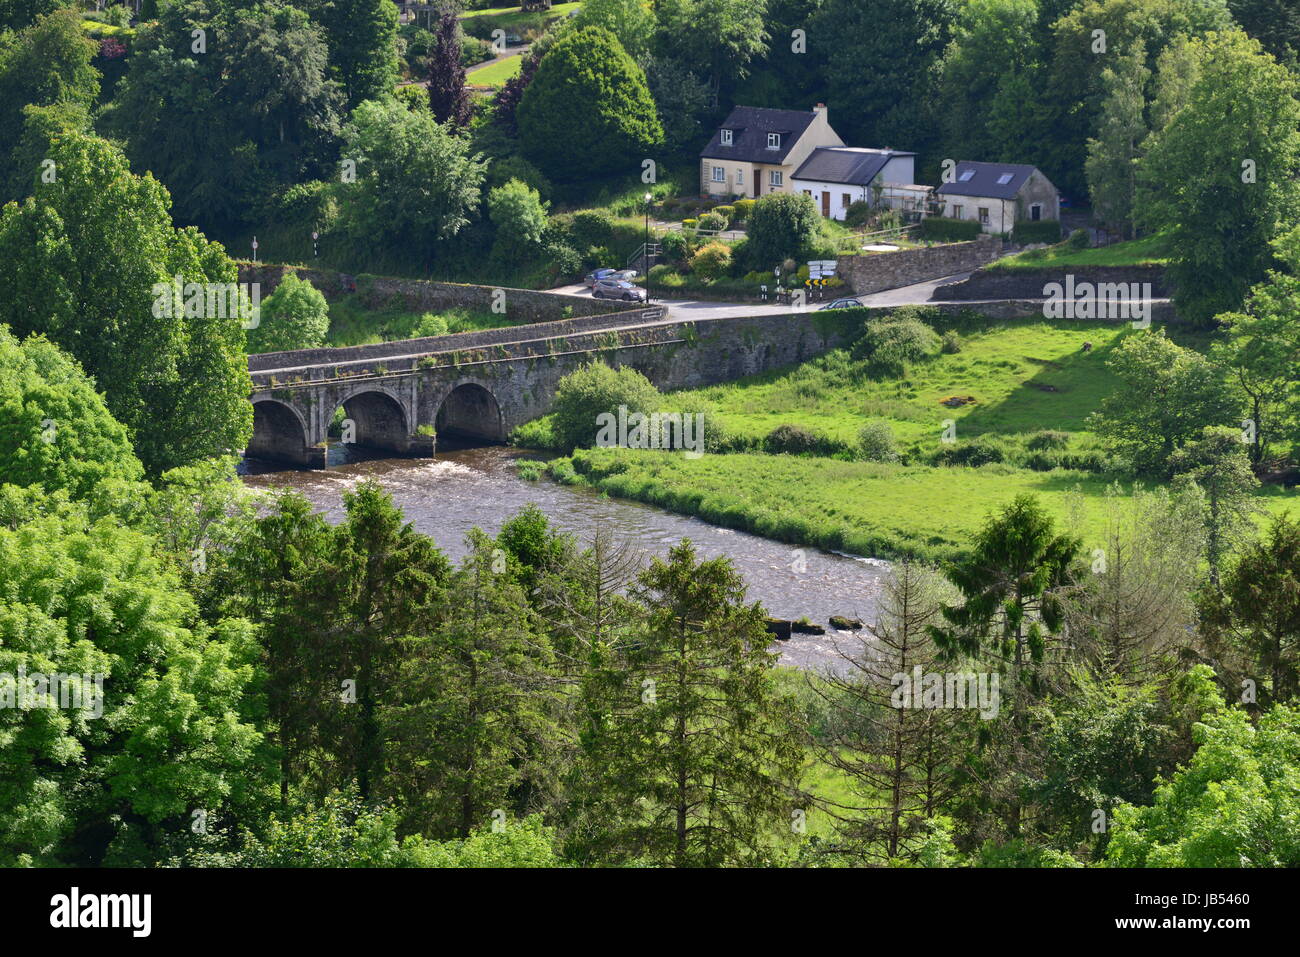 Looking down into the valley at the village of Inistioge in Summertime Stock Photo